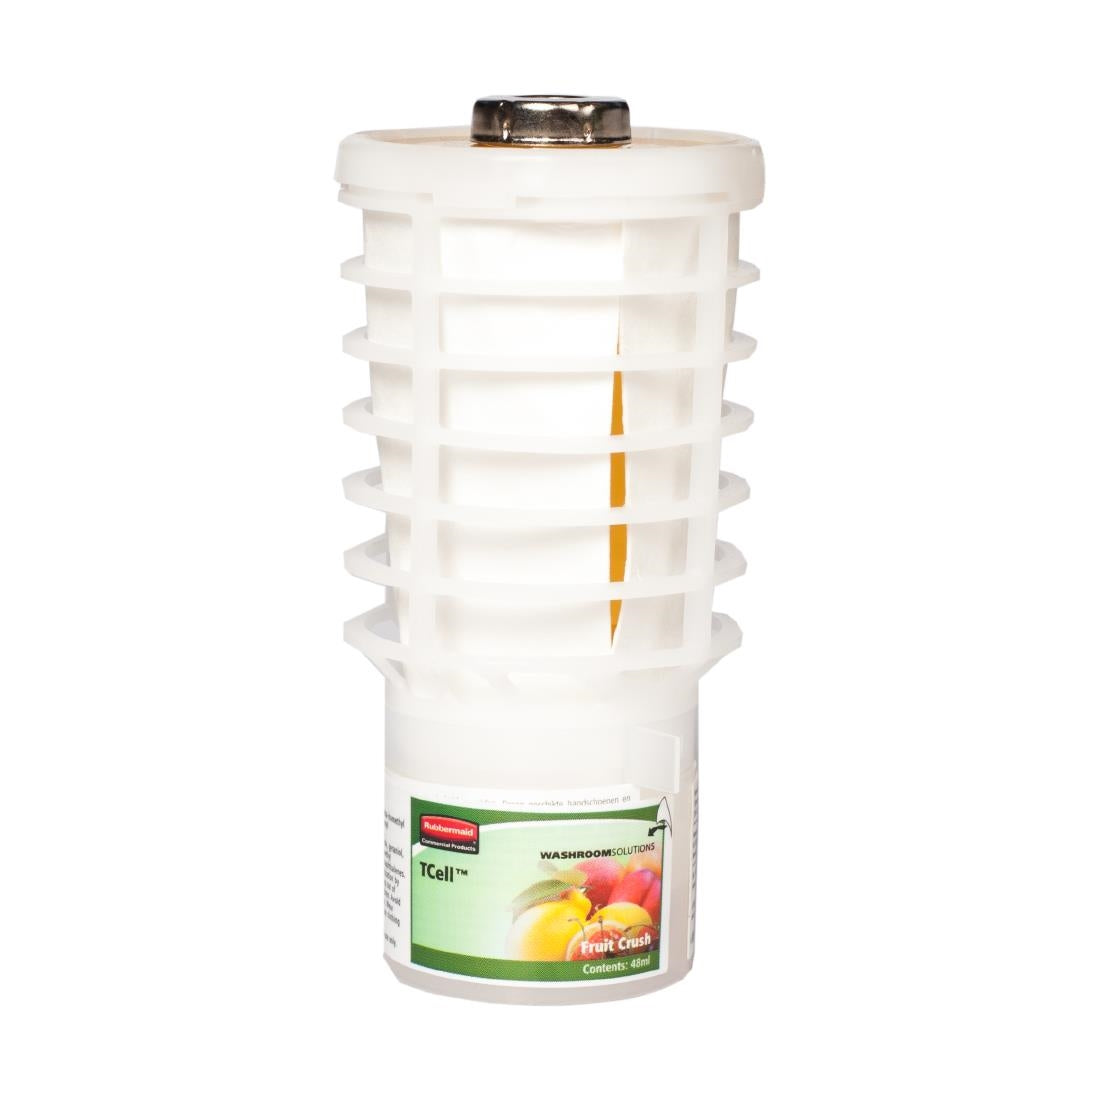 CH545 Rubbermaid TCell 1.0 Air Freshener Refill Fruit Crush JD Catering Equipment Solutions Ltd